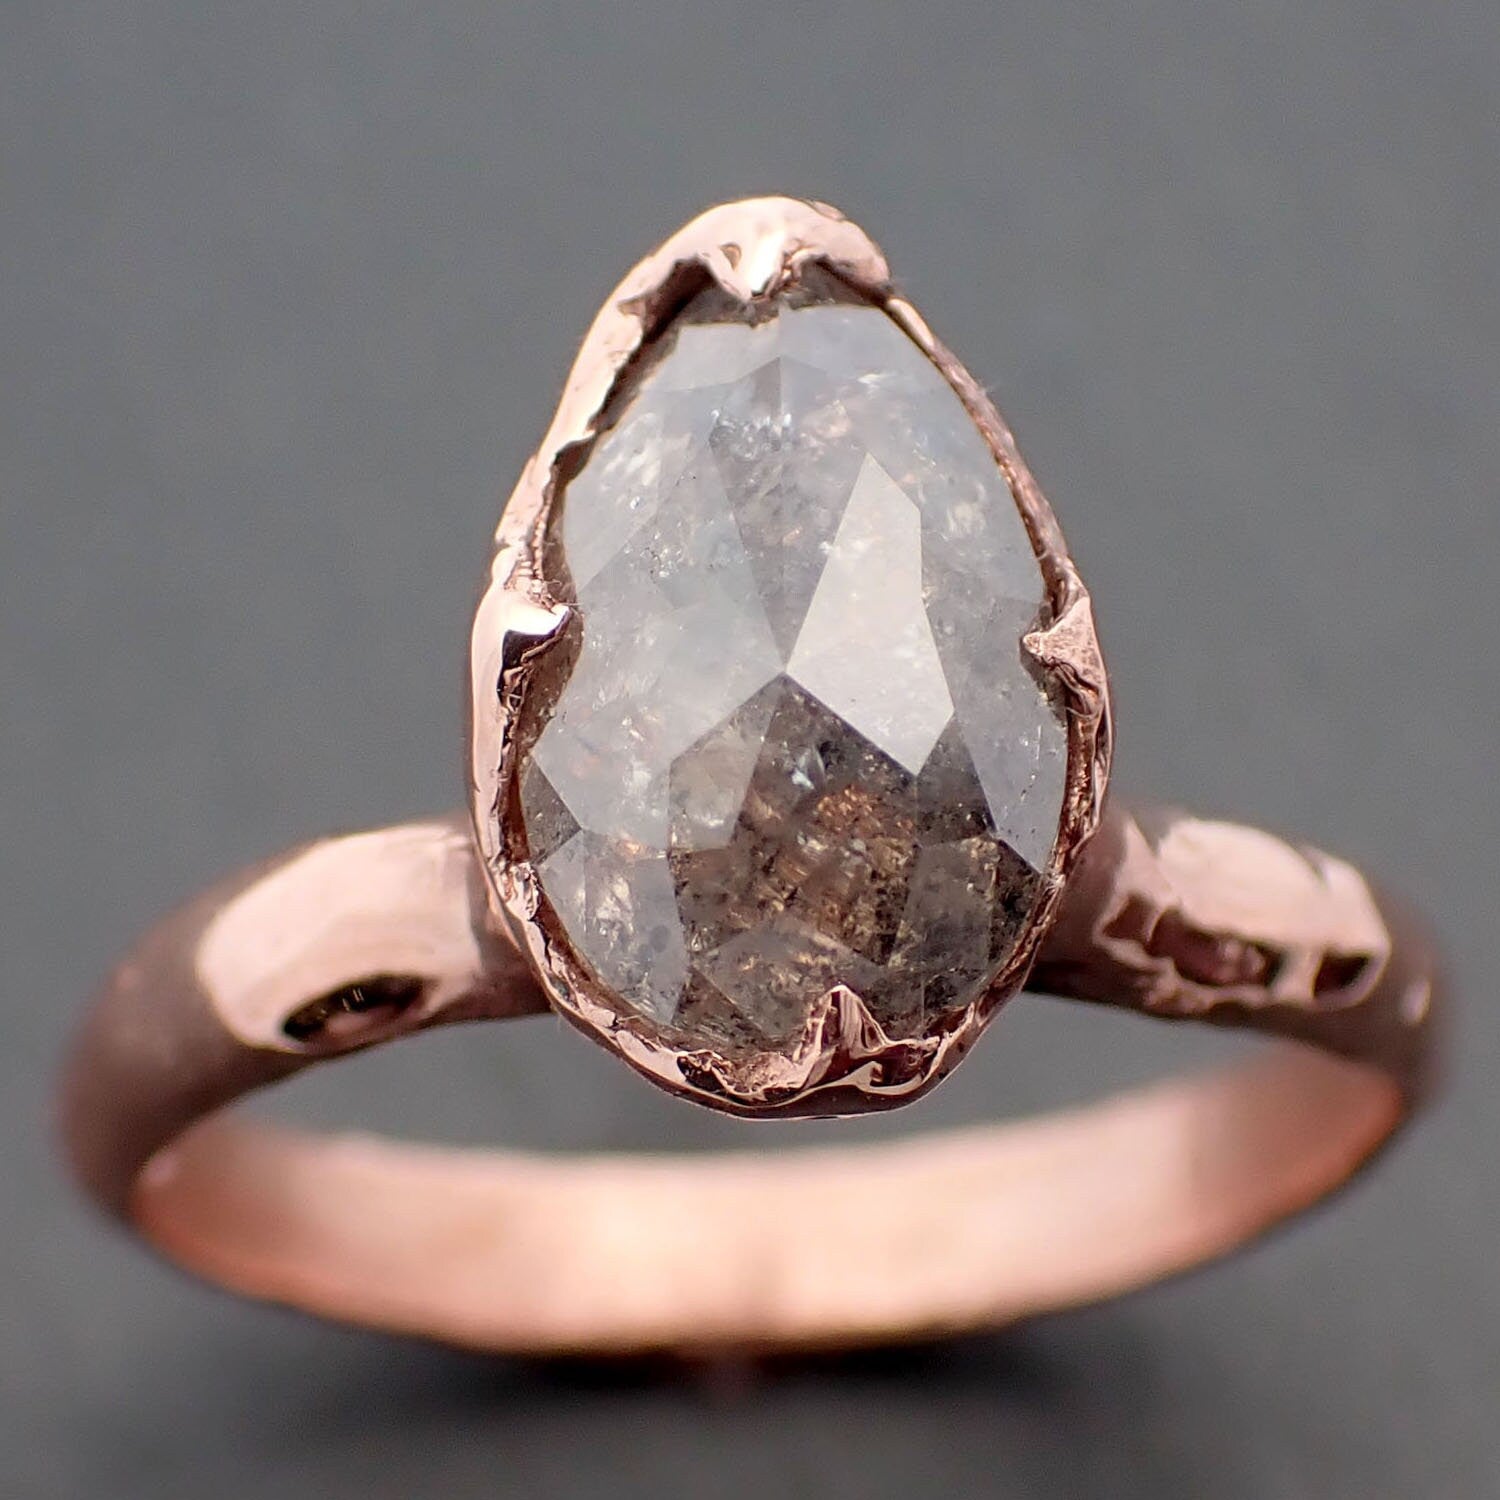 Faceted Fancy cut salt and pepper Diamond Solitaire Engagement 14k Rose Gold Wedding Ring byAngeline 3338